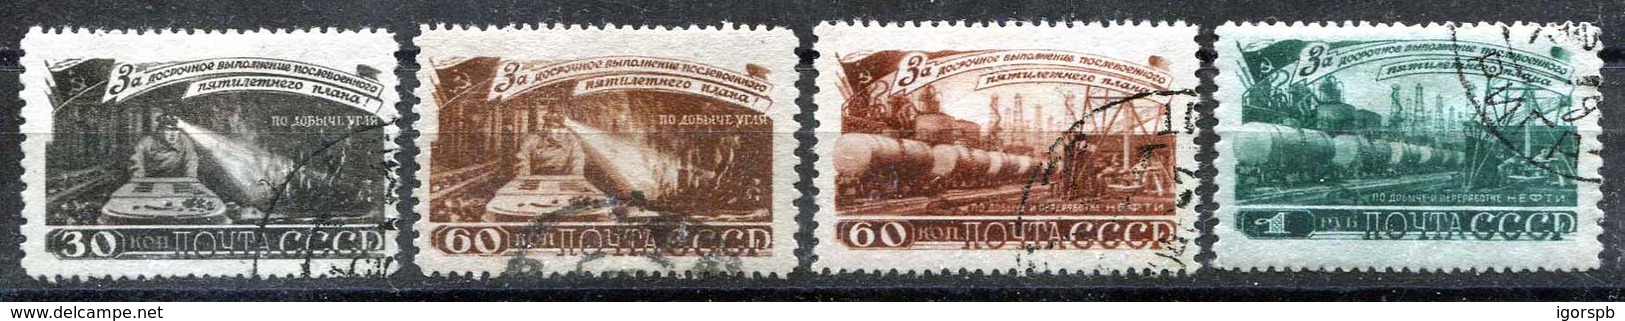 Russia , SG 1416-9 , 1948 , Five Year Plan Of Coal-mining And Oil Extraction , Complete Set  , Used - Used Stamps